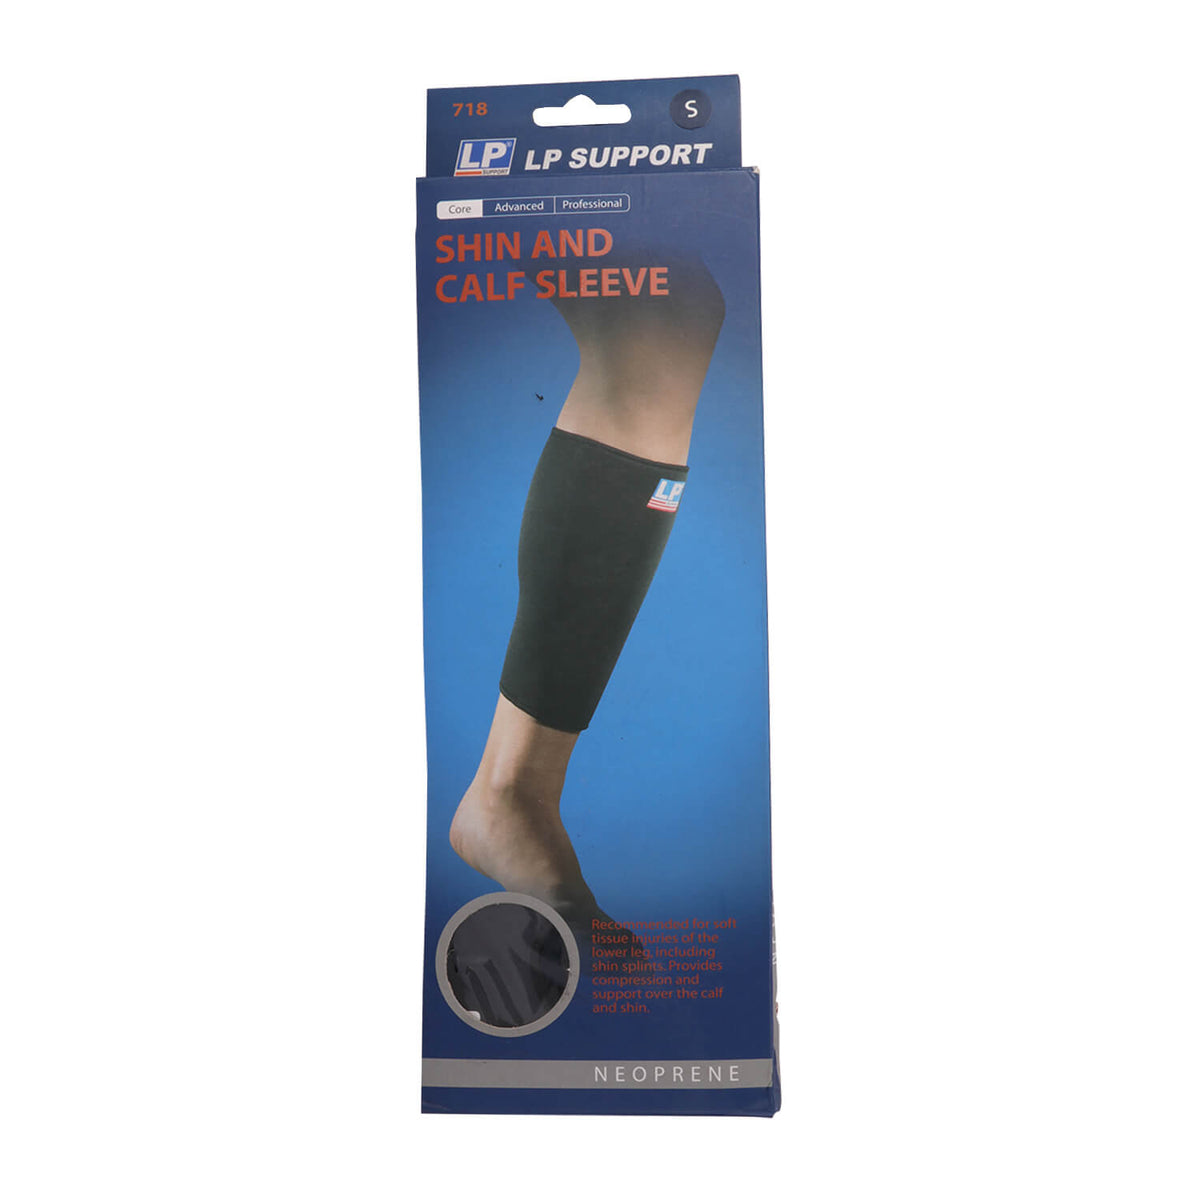 Leosportz (1 pair) of calf compression support sleeves for Shin